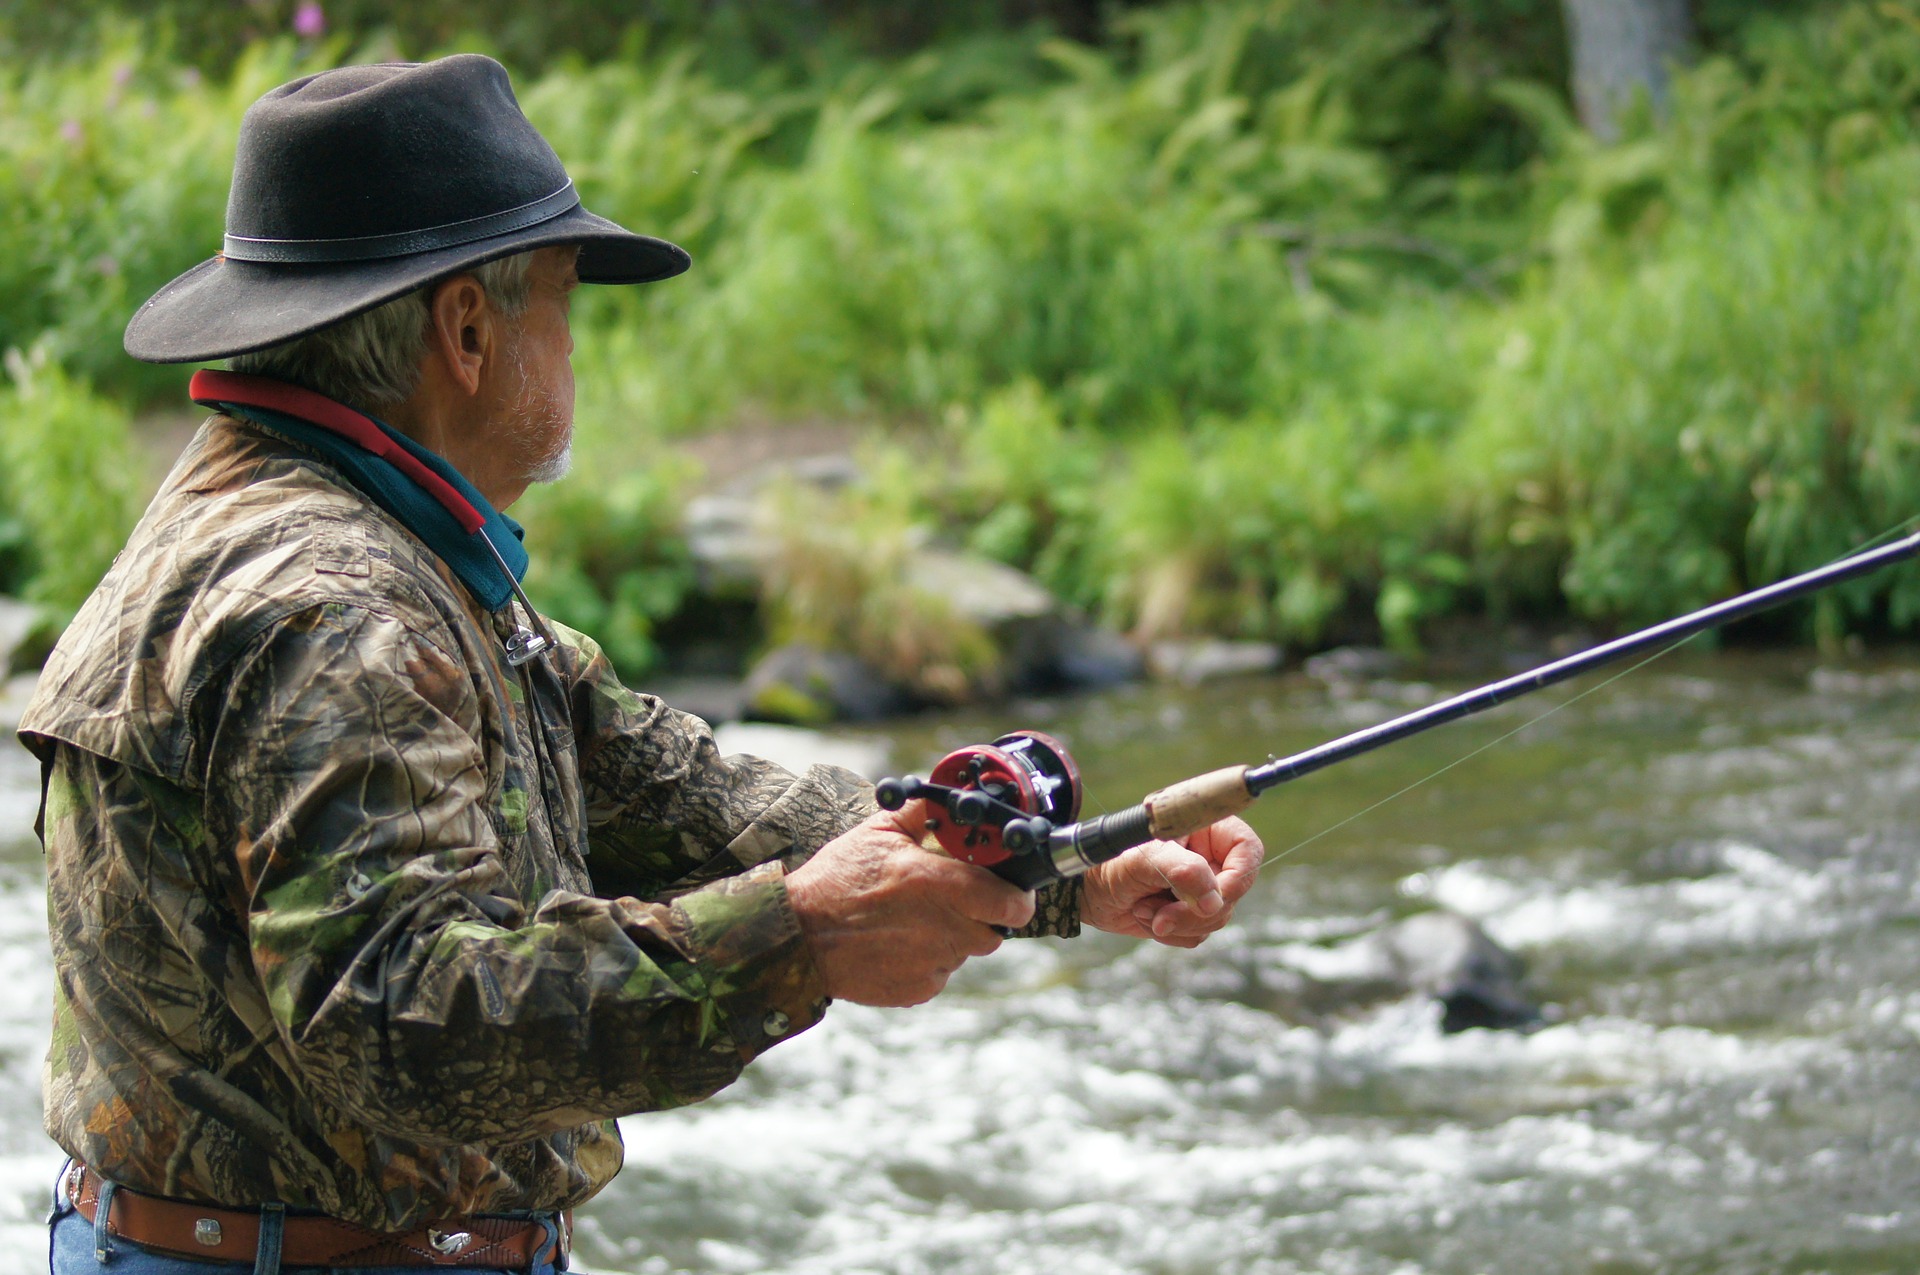 A man fishing like guests of Buffalo Cabins and Lodges can do in summer and fall.